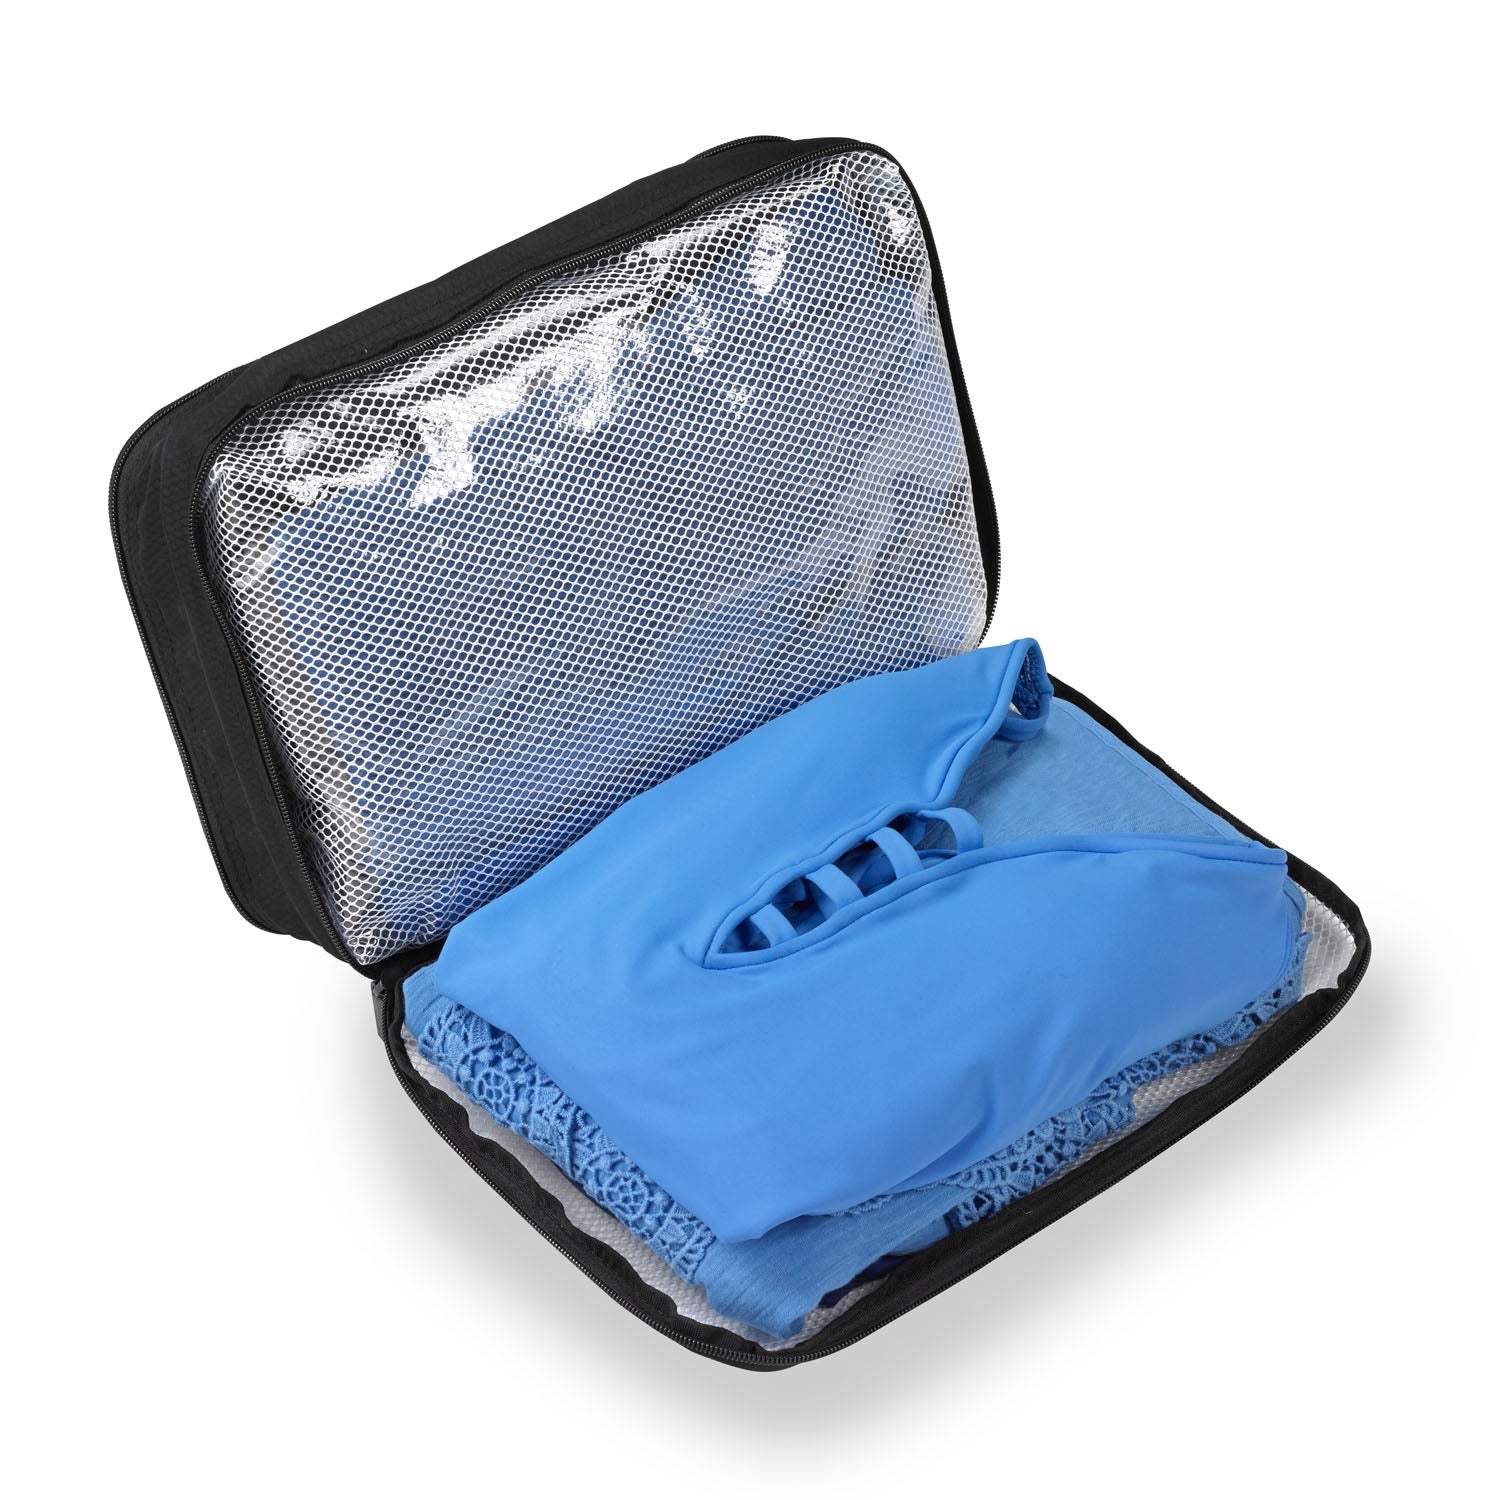 Small Luggage Packing Cubes 3-Piece Set #color_black